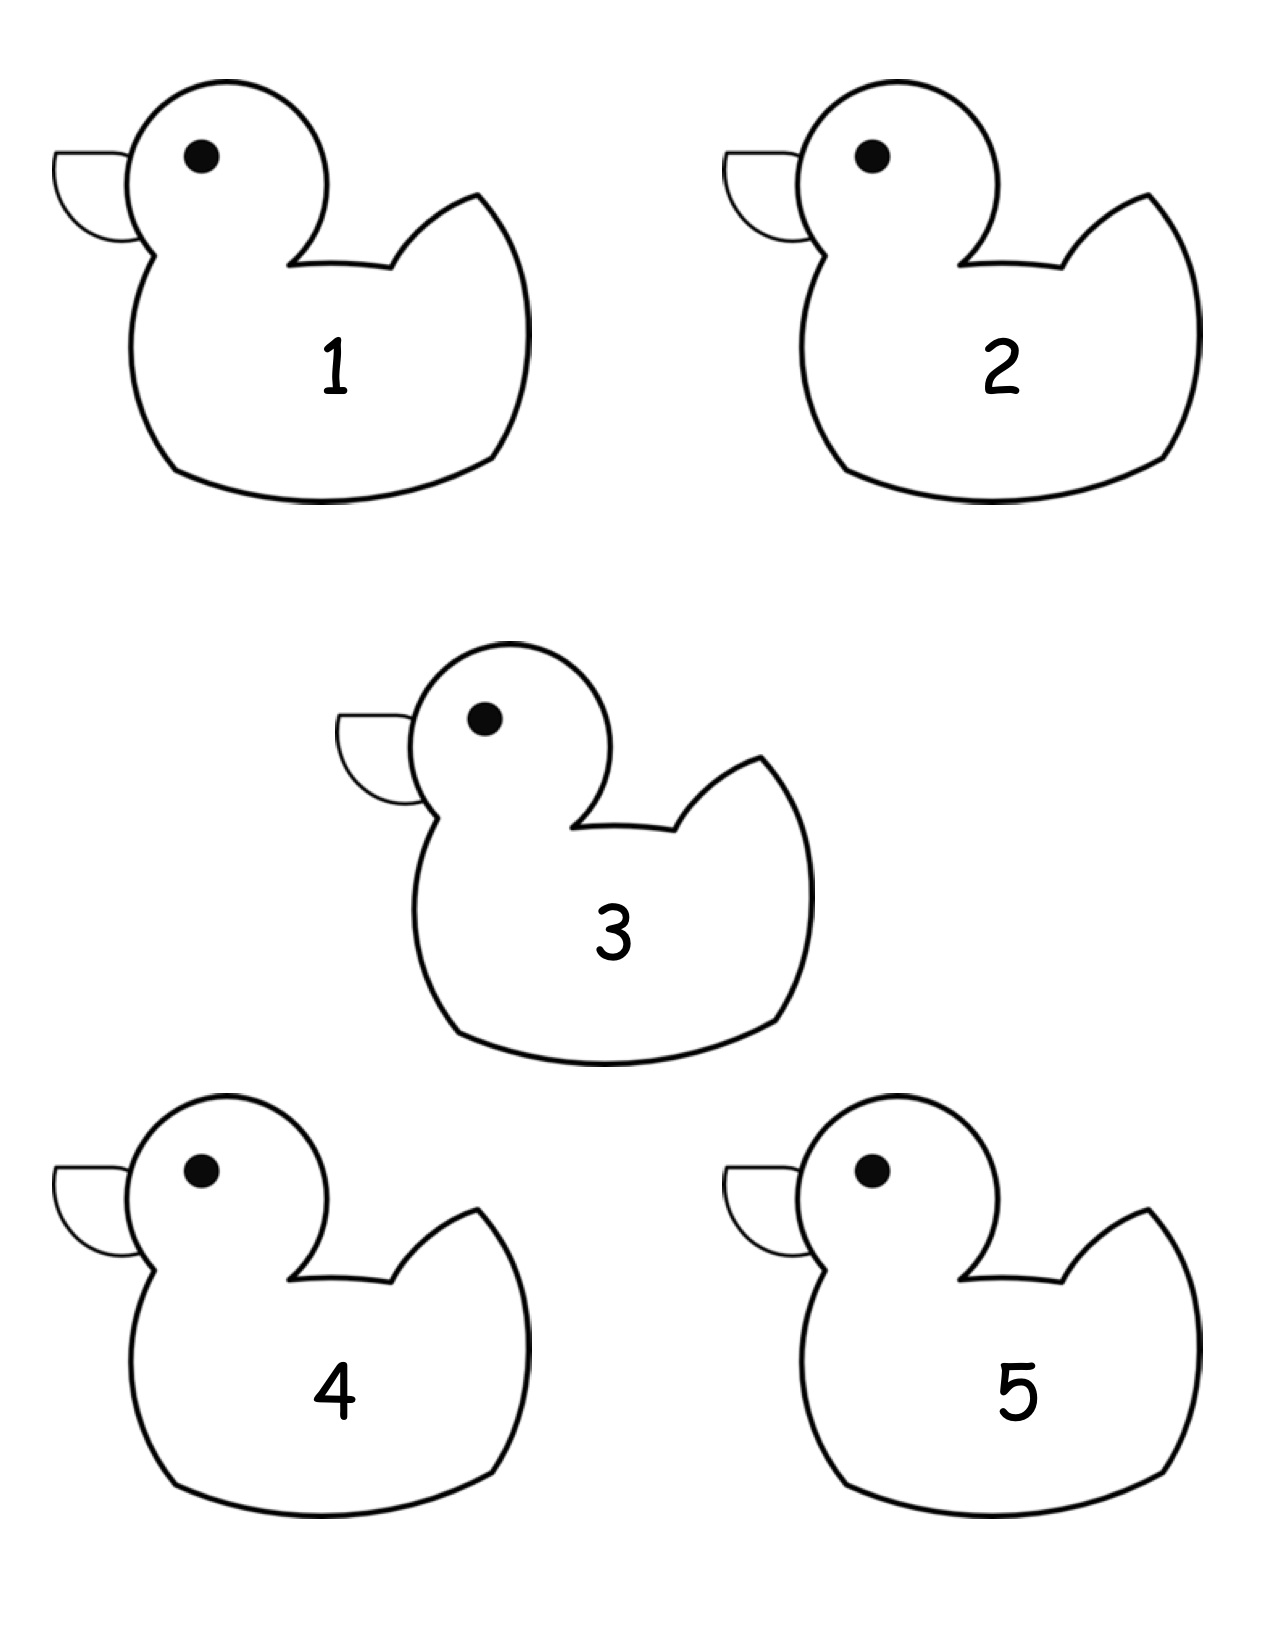 Or The Plastic Ducks To Practice Counting Backward From 10   0